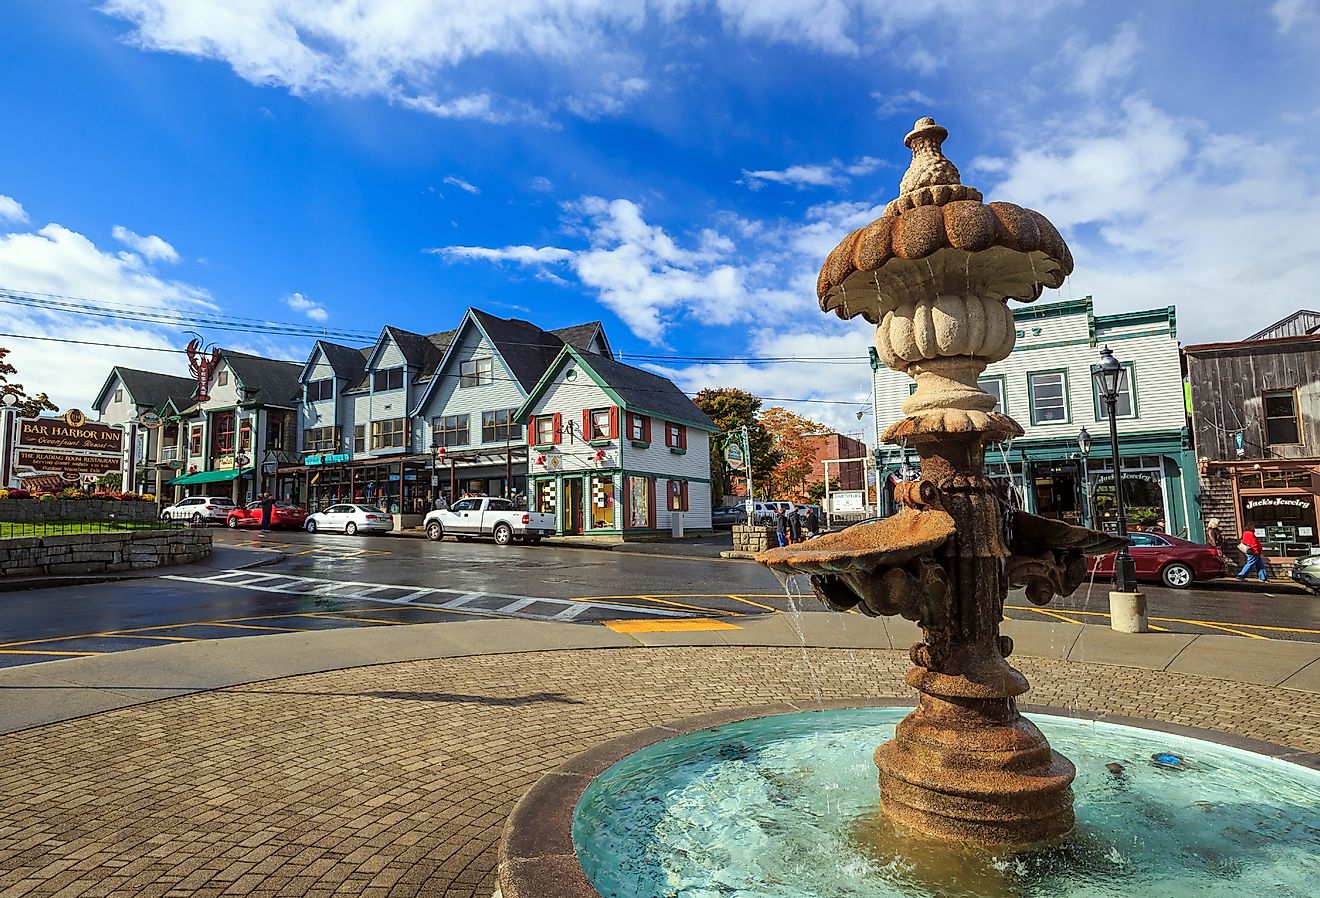 Fountain in downtown Bar Harbor, Maine. Image credit f11photo via Shutterstock